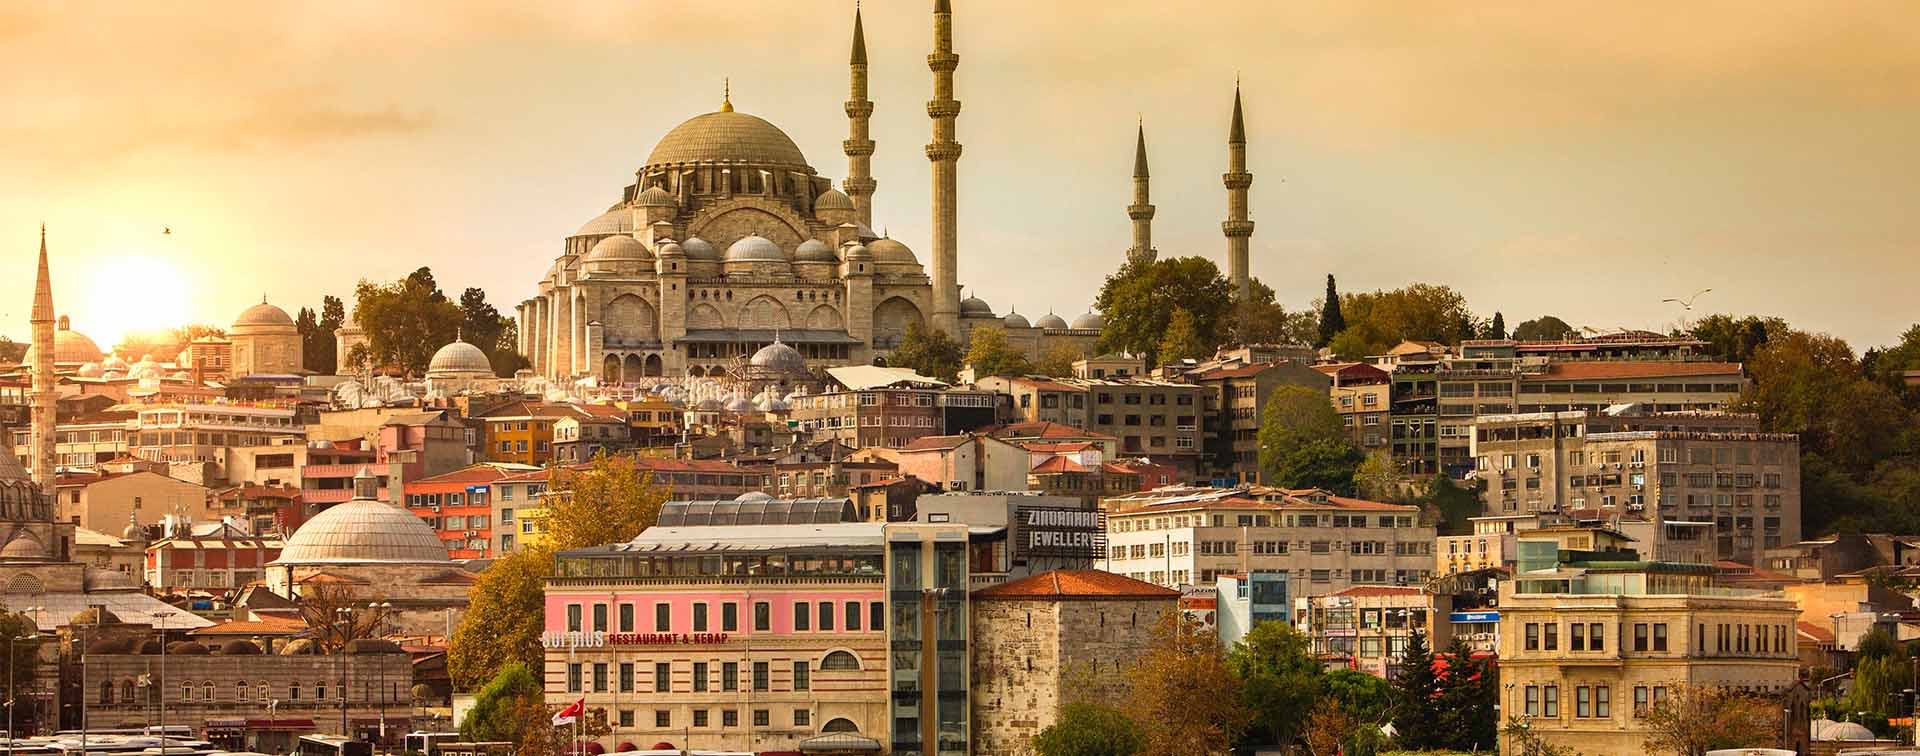 Panorama view of the Suleymaniye Mosque in Istanbul at sunset